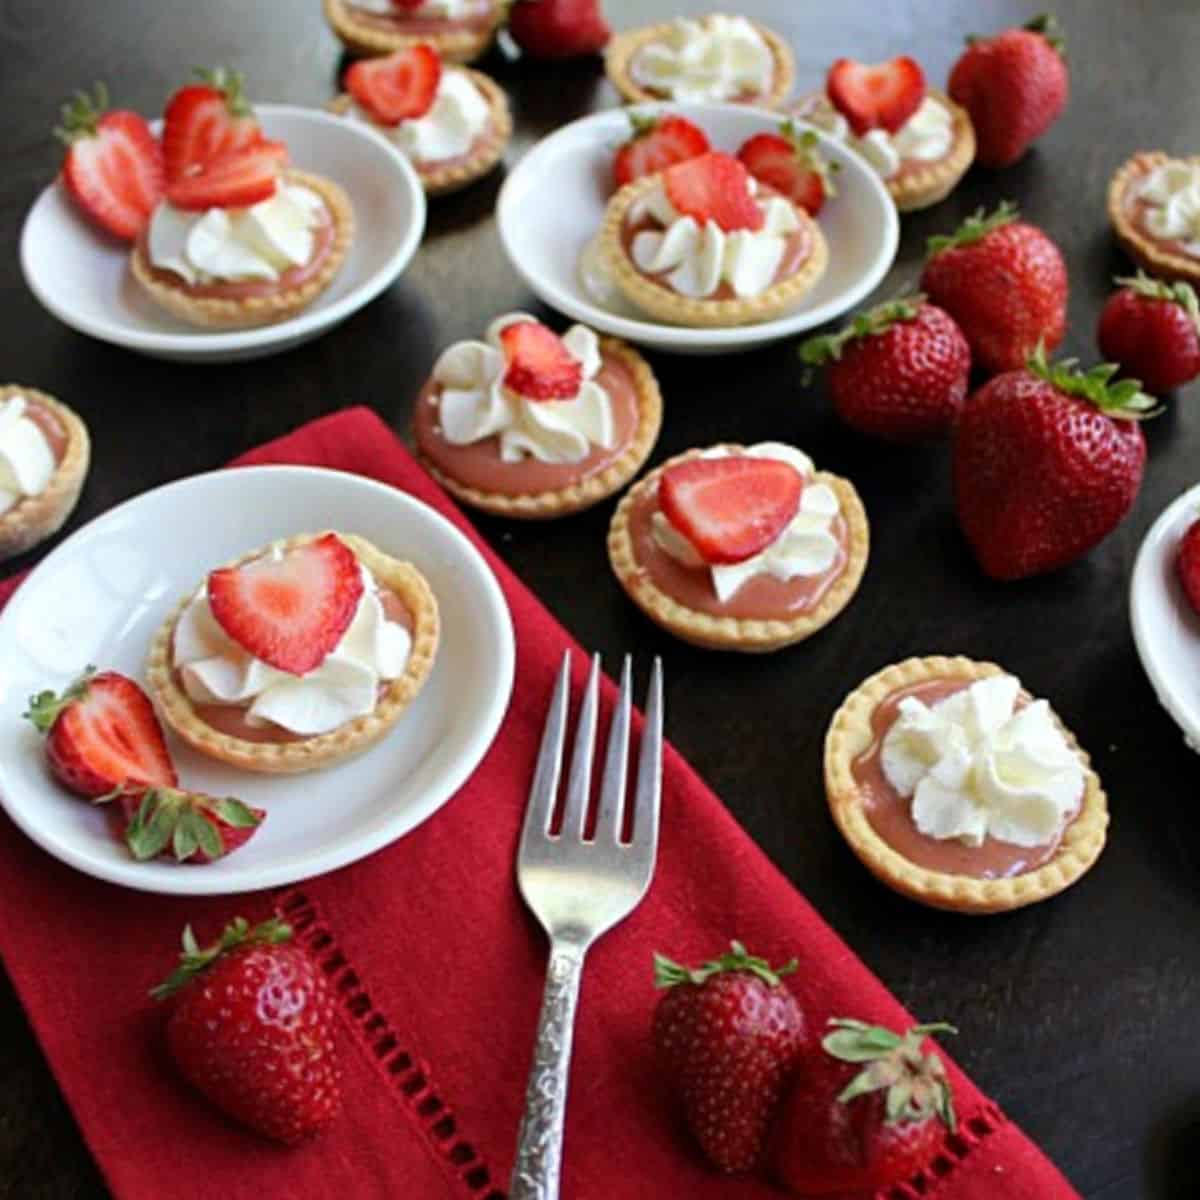 Mini strawberry tarts with strawberry curd in white bowls.